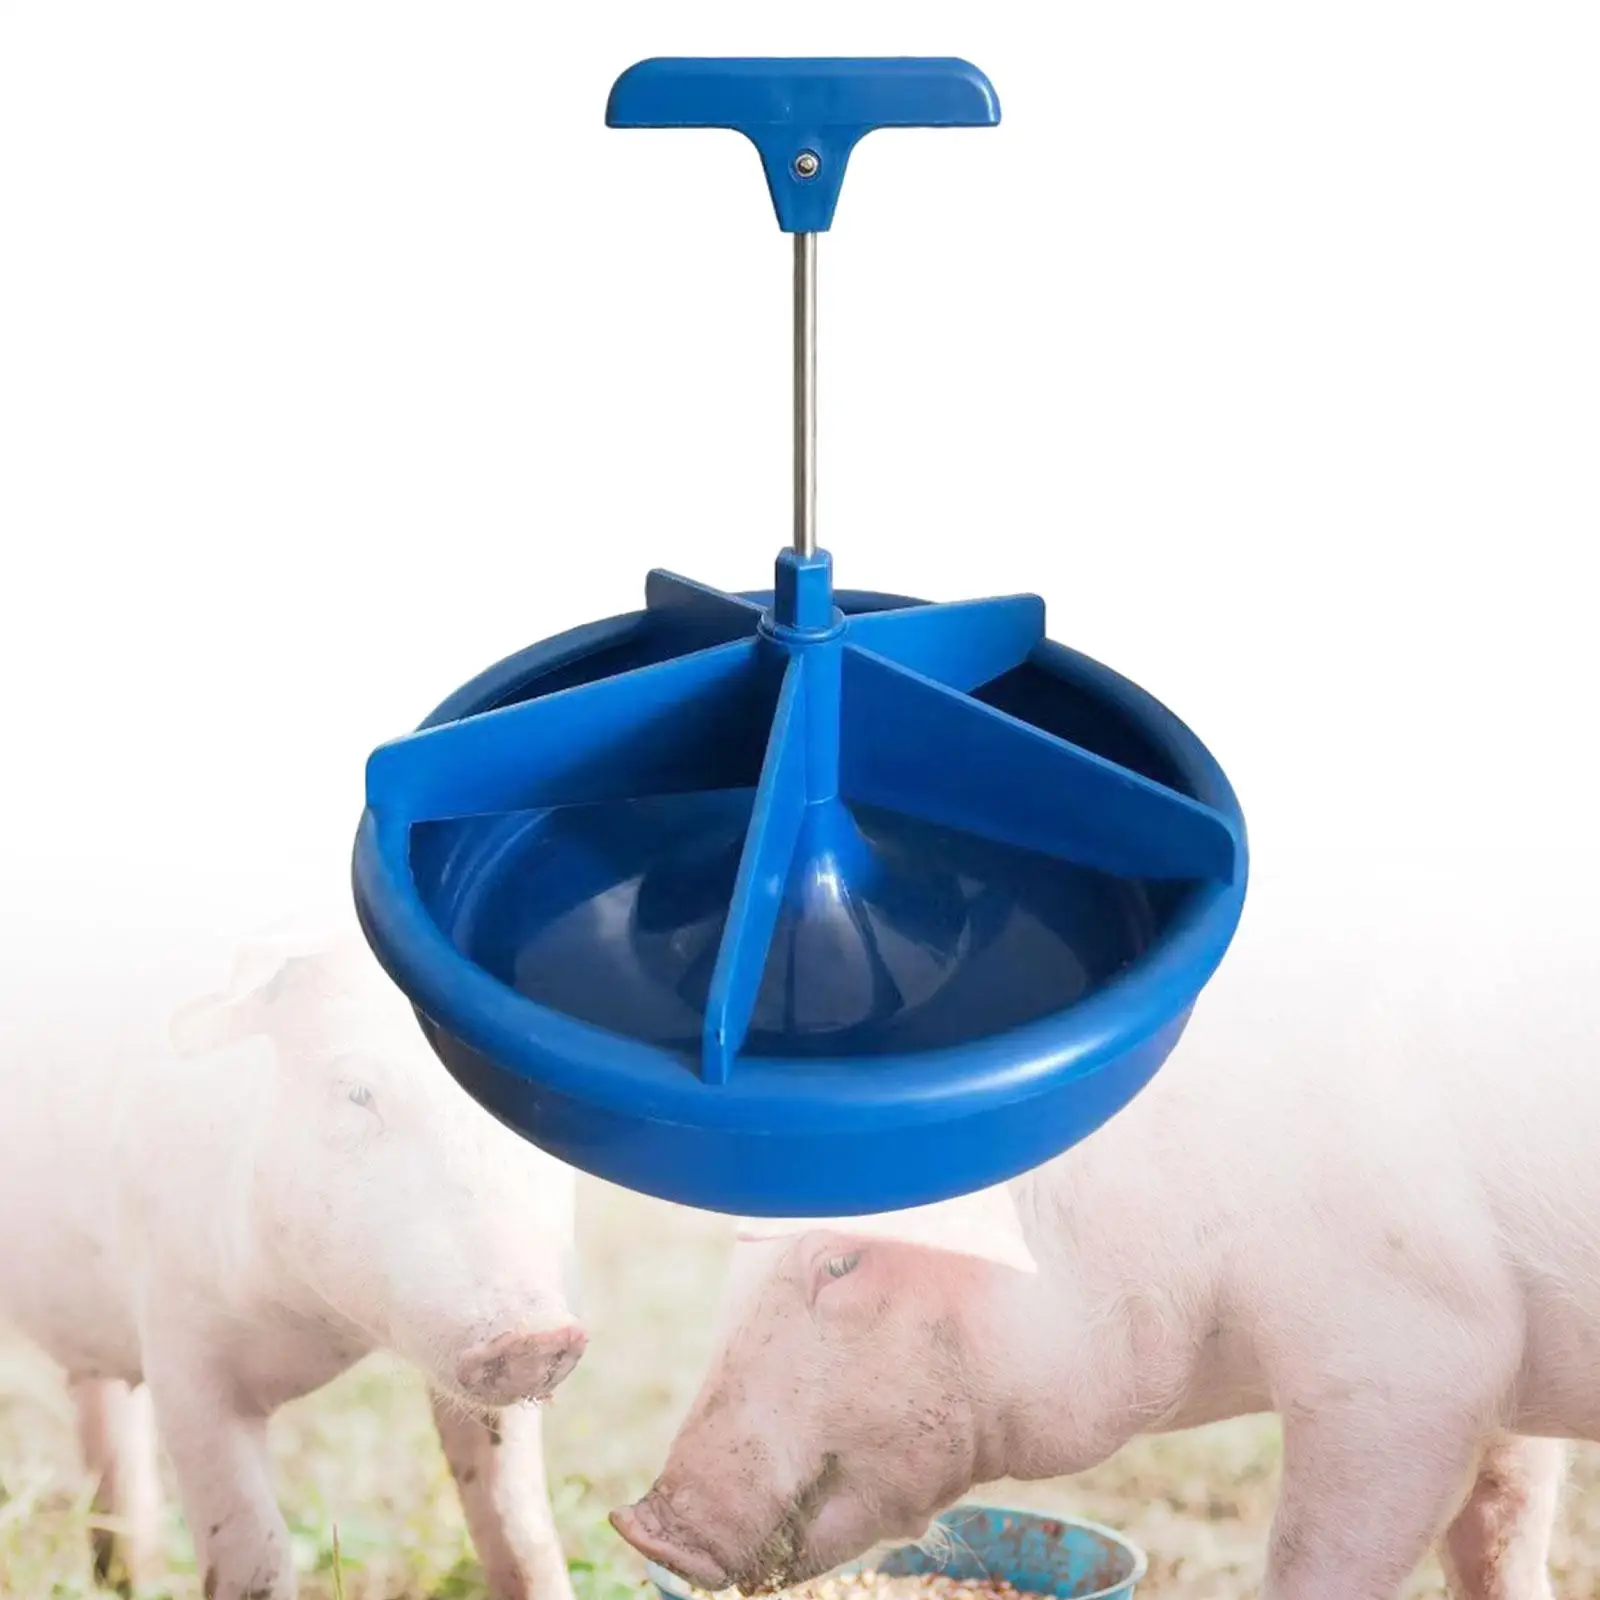 Pig feed Trough Bucket 5 Slot Livestock feed Bowl Piglet Feeder Pig Feeder Bowl for Poultry Pet Dog Animal Husbandry Accessories